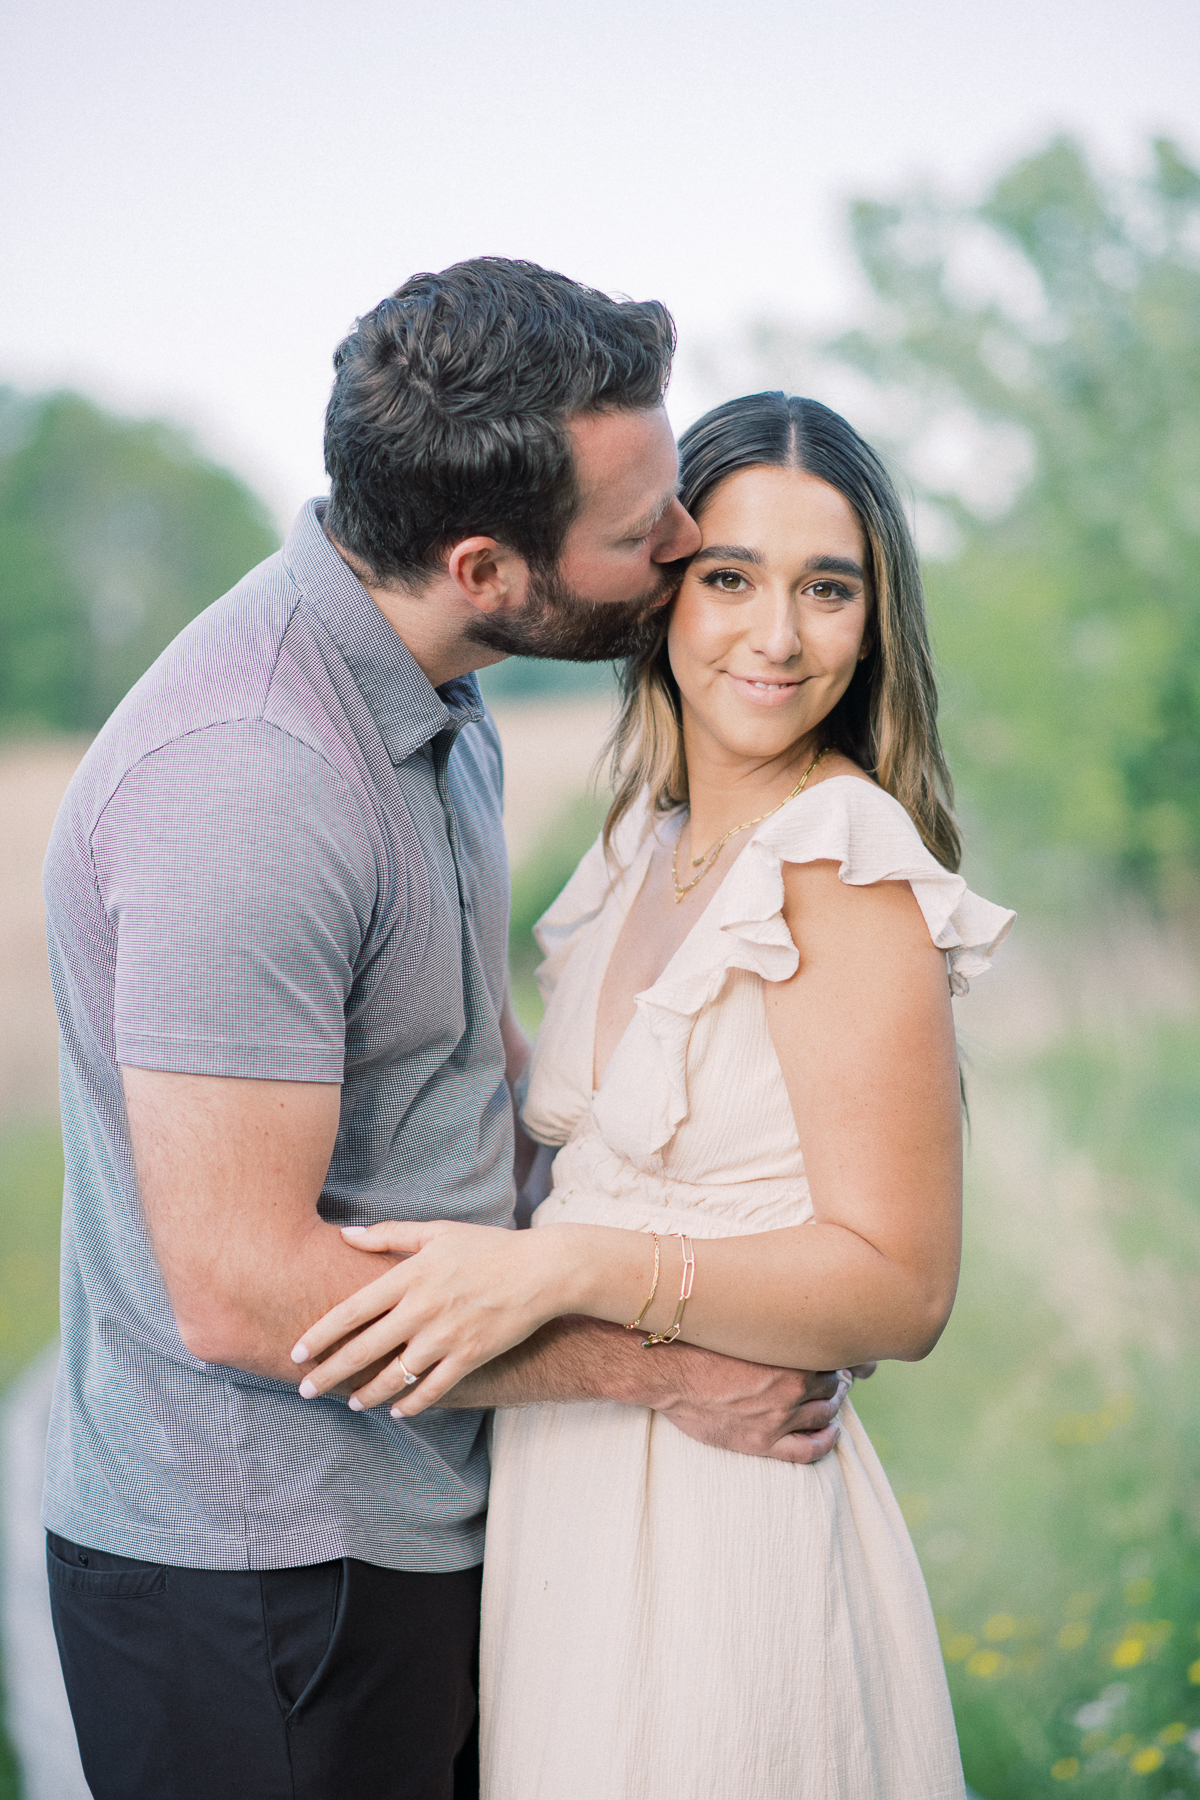 Vernon New Jersey Wedding and Engagement Photographer, Vernon New Jersey Wedding Photographer, Vernon New Jersey, New Jersey Wedding Photographer, New Jersey Weddings, New Jersey Wedding Photographers, New Jersey Wedding Photography, Light and Airy